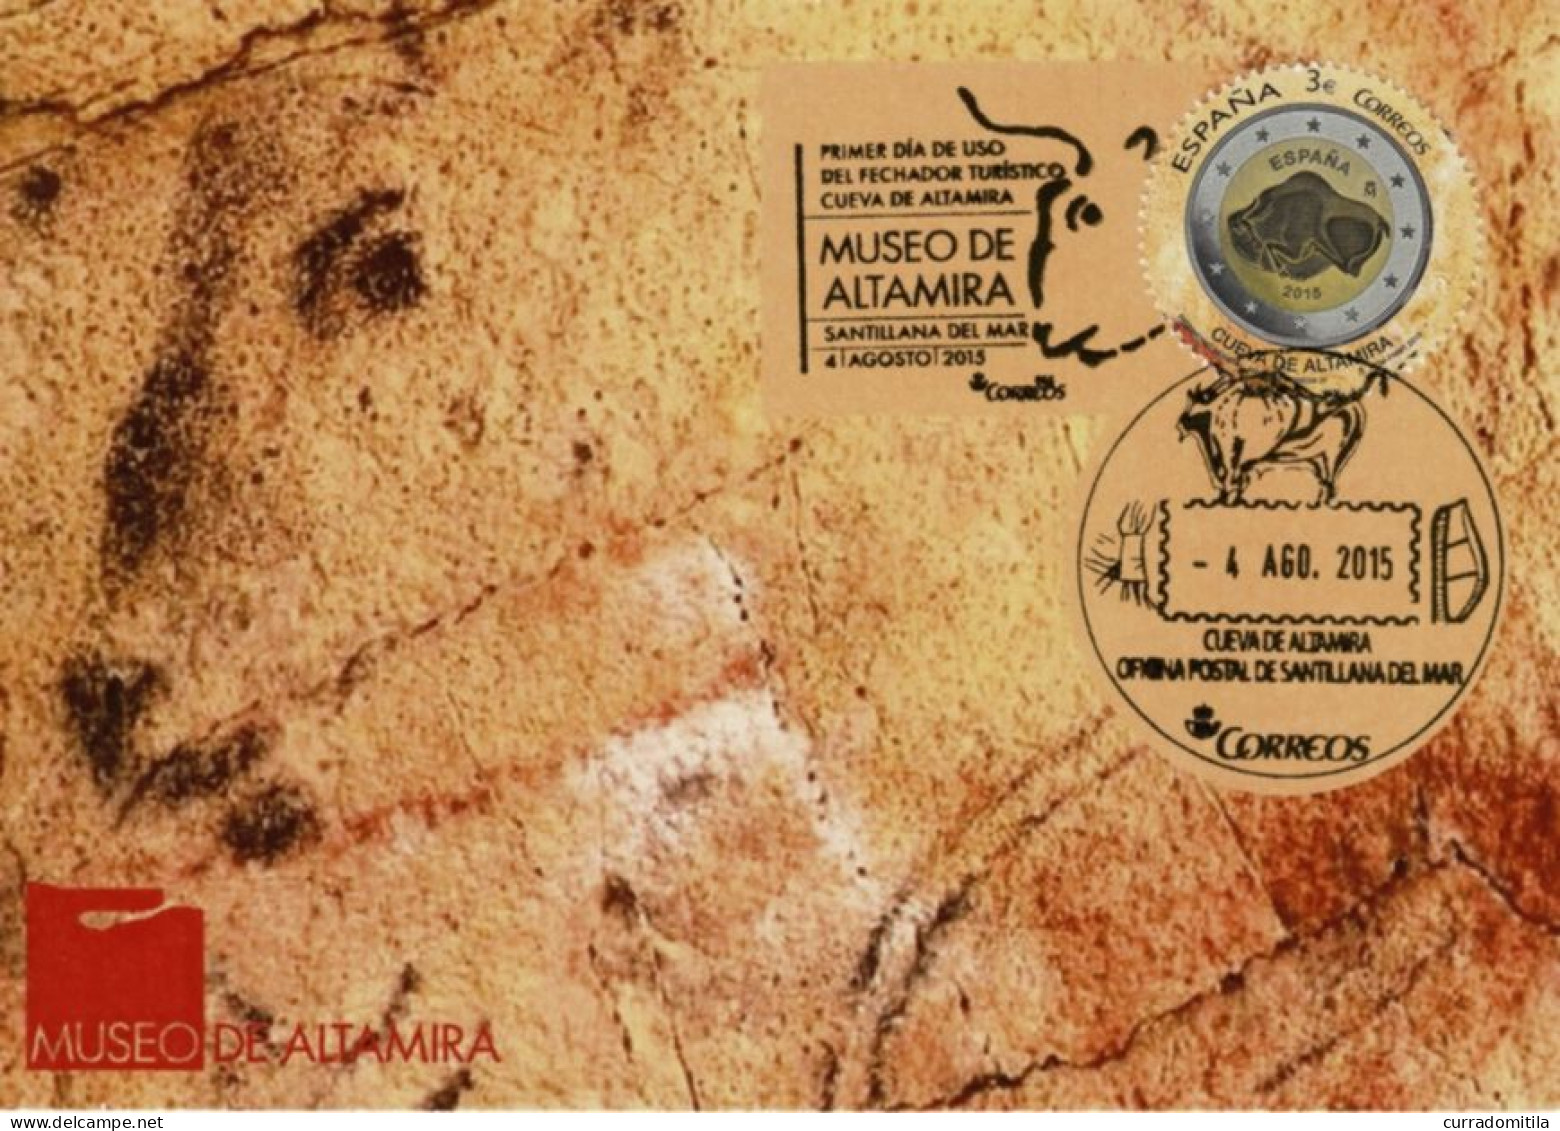 2015 Card (Large) With Rock Art Cancellations, Prehistoric Bison Of Altamita And Special Stamp Of Altamira - Archaeology